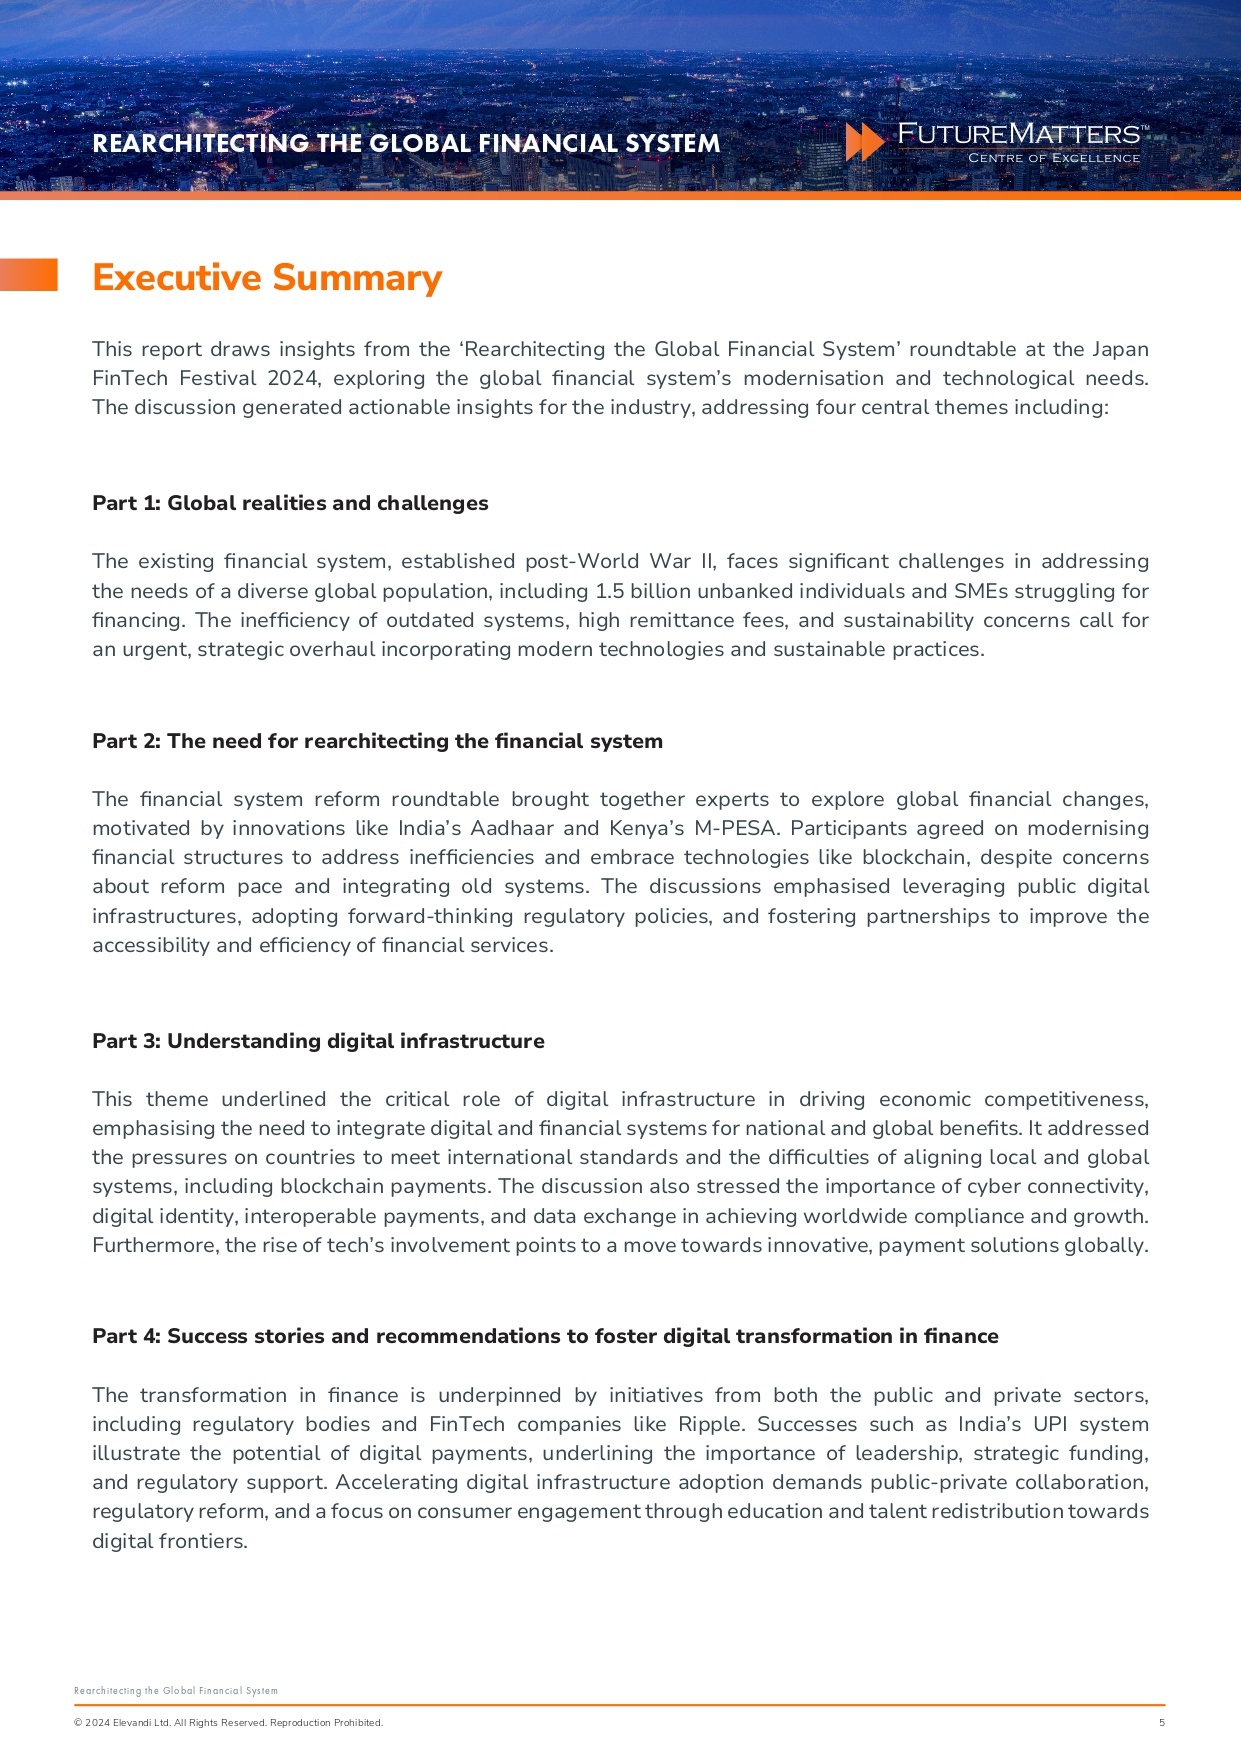 Rearchitecting the global financial system_FM report_17Jul_FINAL (3)_page-0005